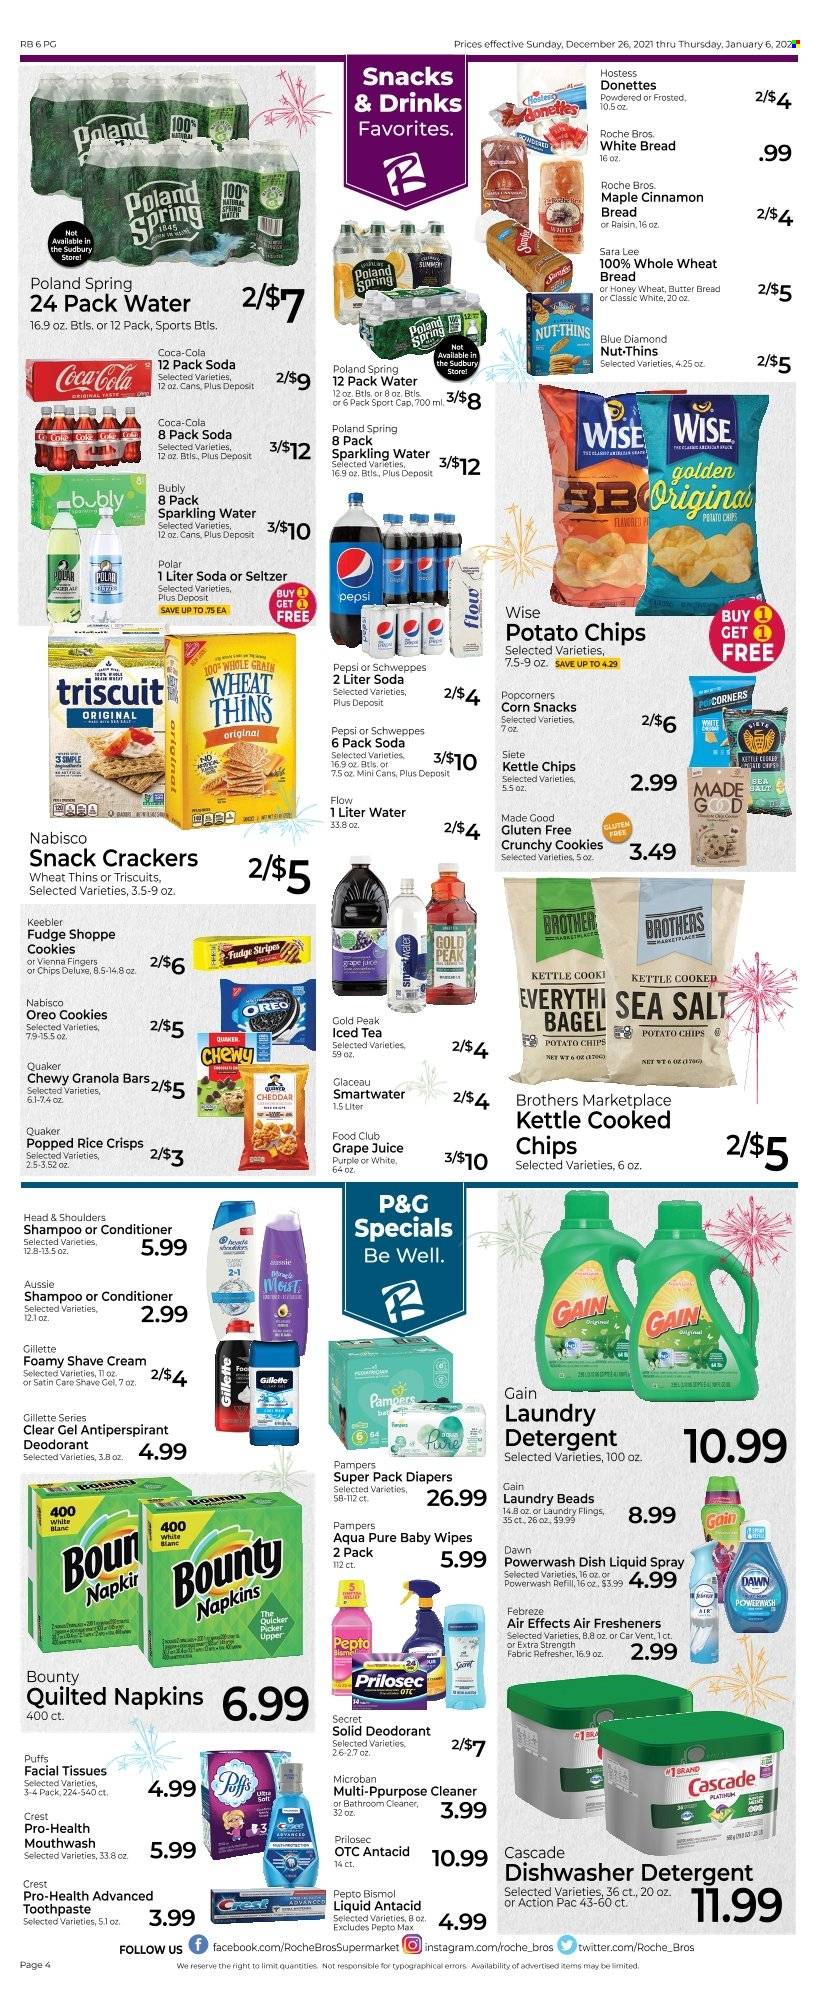 thumbnail - Roche Bros. Flyer - 12/26/2021 - 01/06/2022 - Sales products - bagels, wheat bread, white bread, Sara Lee, puffs, Quaker, Oreo, cookies, fudge, vienna fingers, snack, Bounty, crackers, Keebler, potato chips, chips, Thins, popcorn, rice crisps, granola bar, rice, cinnamon, Blue Diamond, Coca-Cola, Schweppes, Pepsi, juice, ice tea, seltzer water, soda, sparkling water, Smartwater, wipes, Pampers, baby wipes, napkins, nappies, tissues, detergent, Febreze, Gain, cleaner, Cascade, dishwashing liquid, shampoo, toothpaste, mouthwash, Crest, facial tissues, Aussie, conditioner, refresher, Head & Shoulders, anti-perspirant, deodorant, Gillette, shave gel, shave cream, Antacid. Page 5.